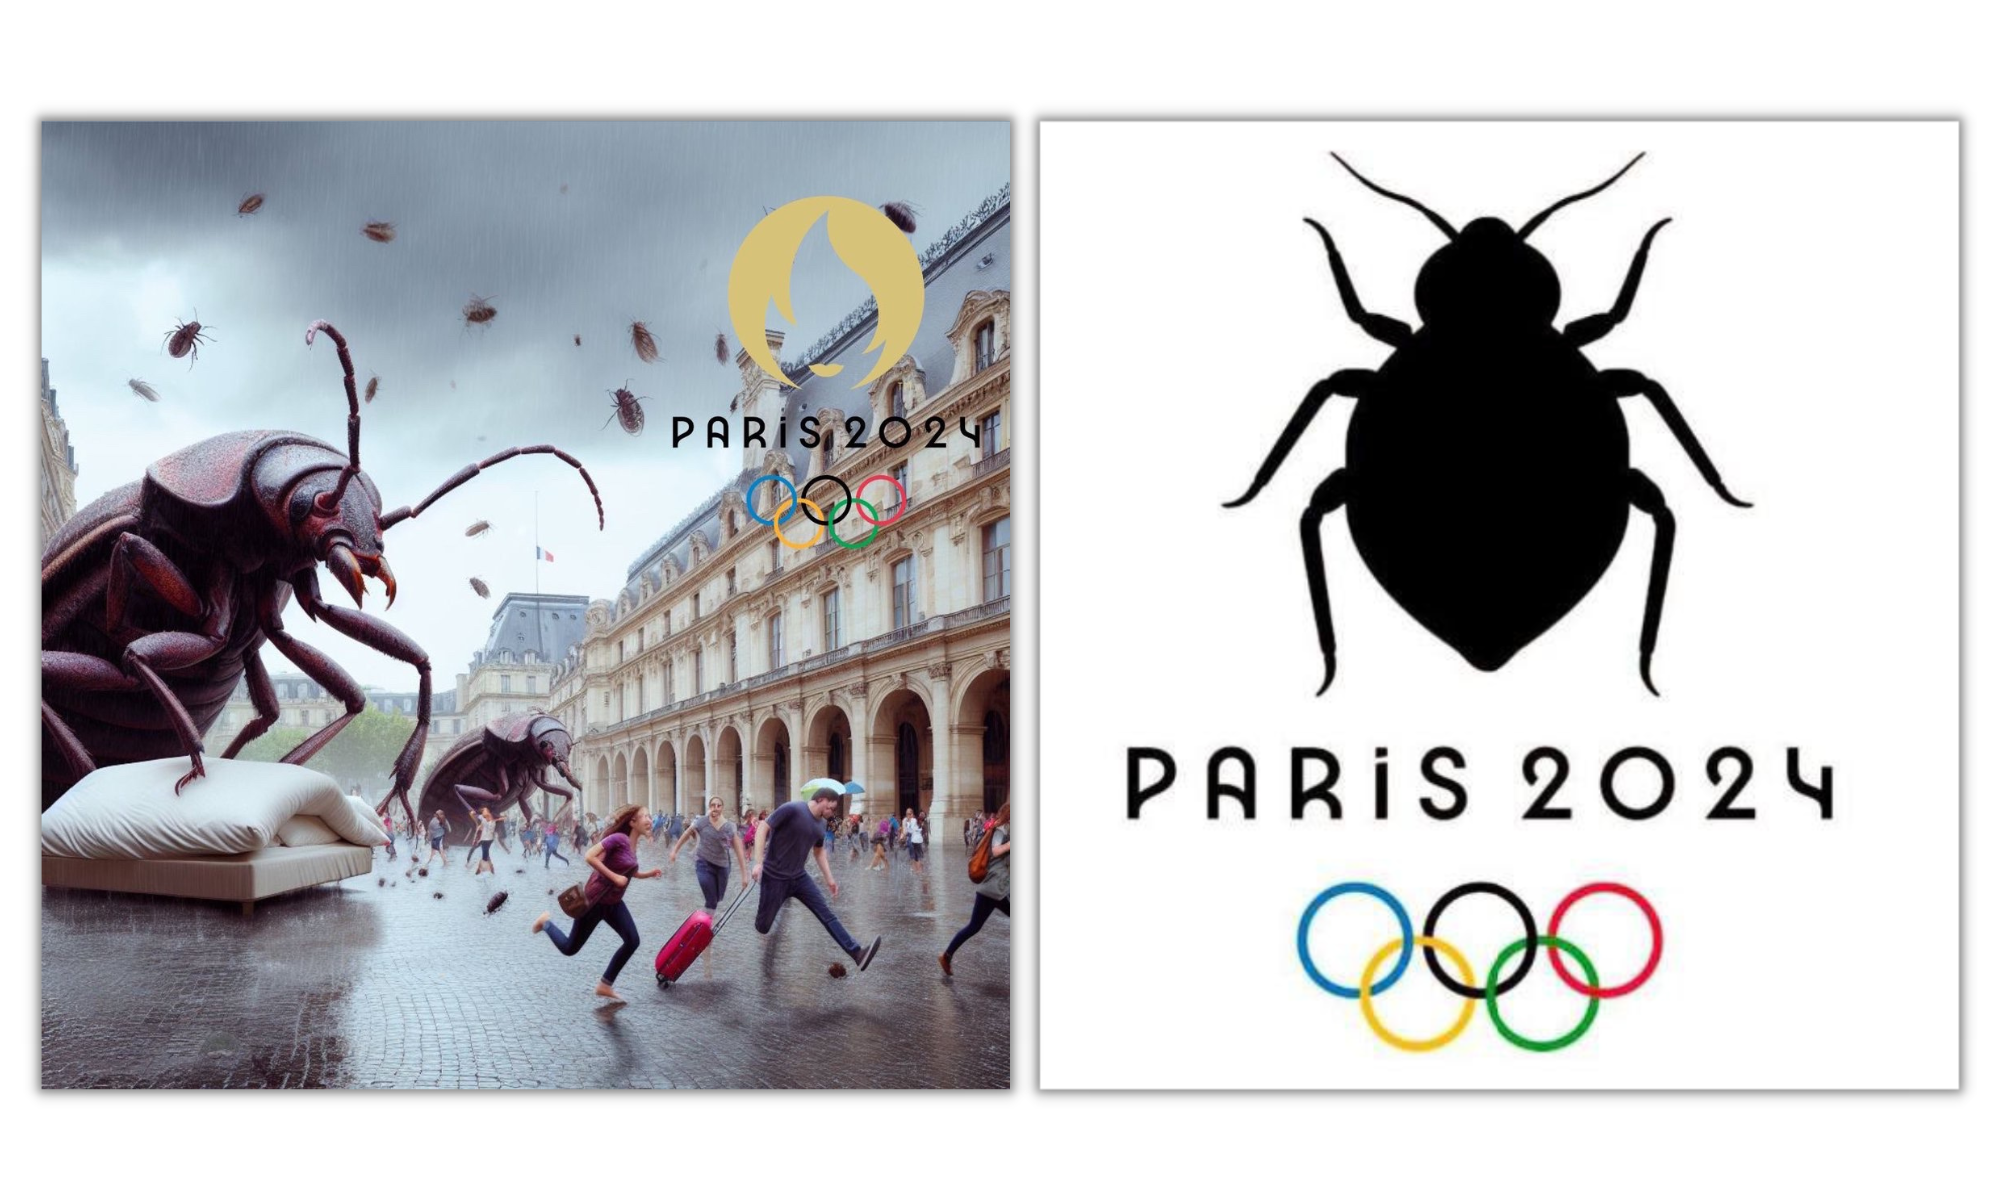 Examples of visuals relayed on social networks and aimed at degrading the image of France in the run-up to the Olympic Games.